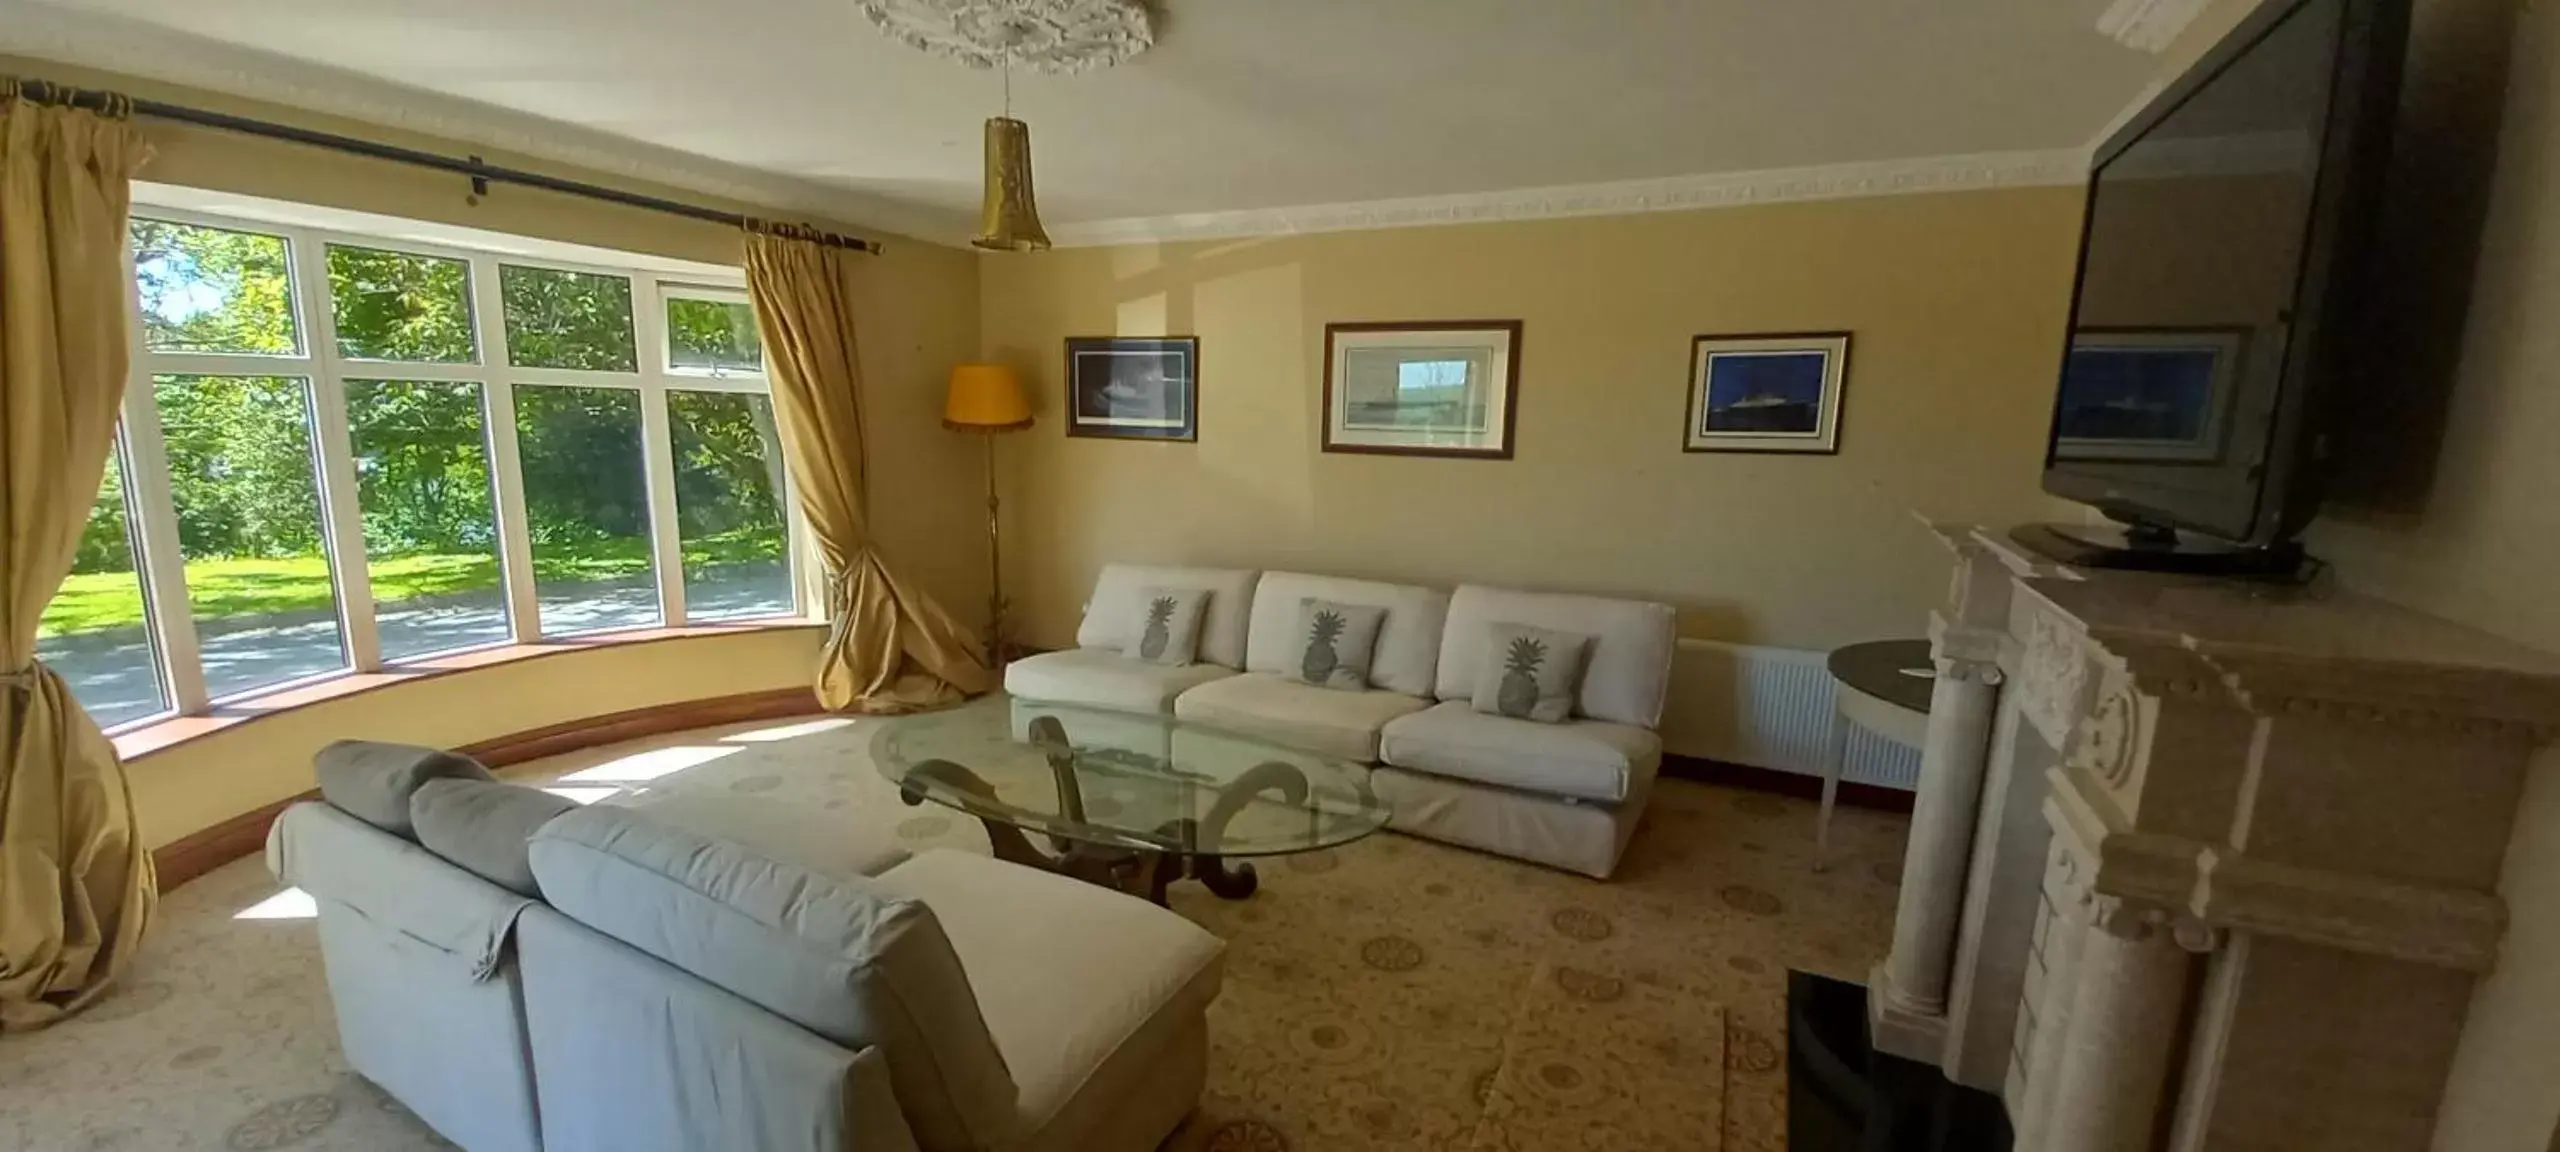 Seating Area in Ardsallagh Lodge